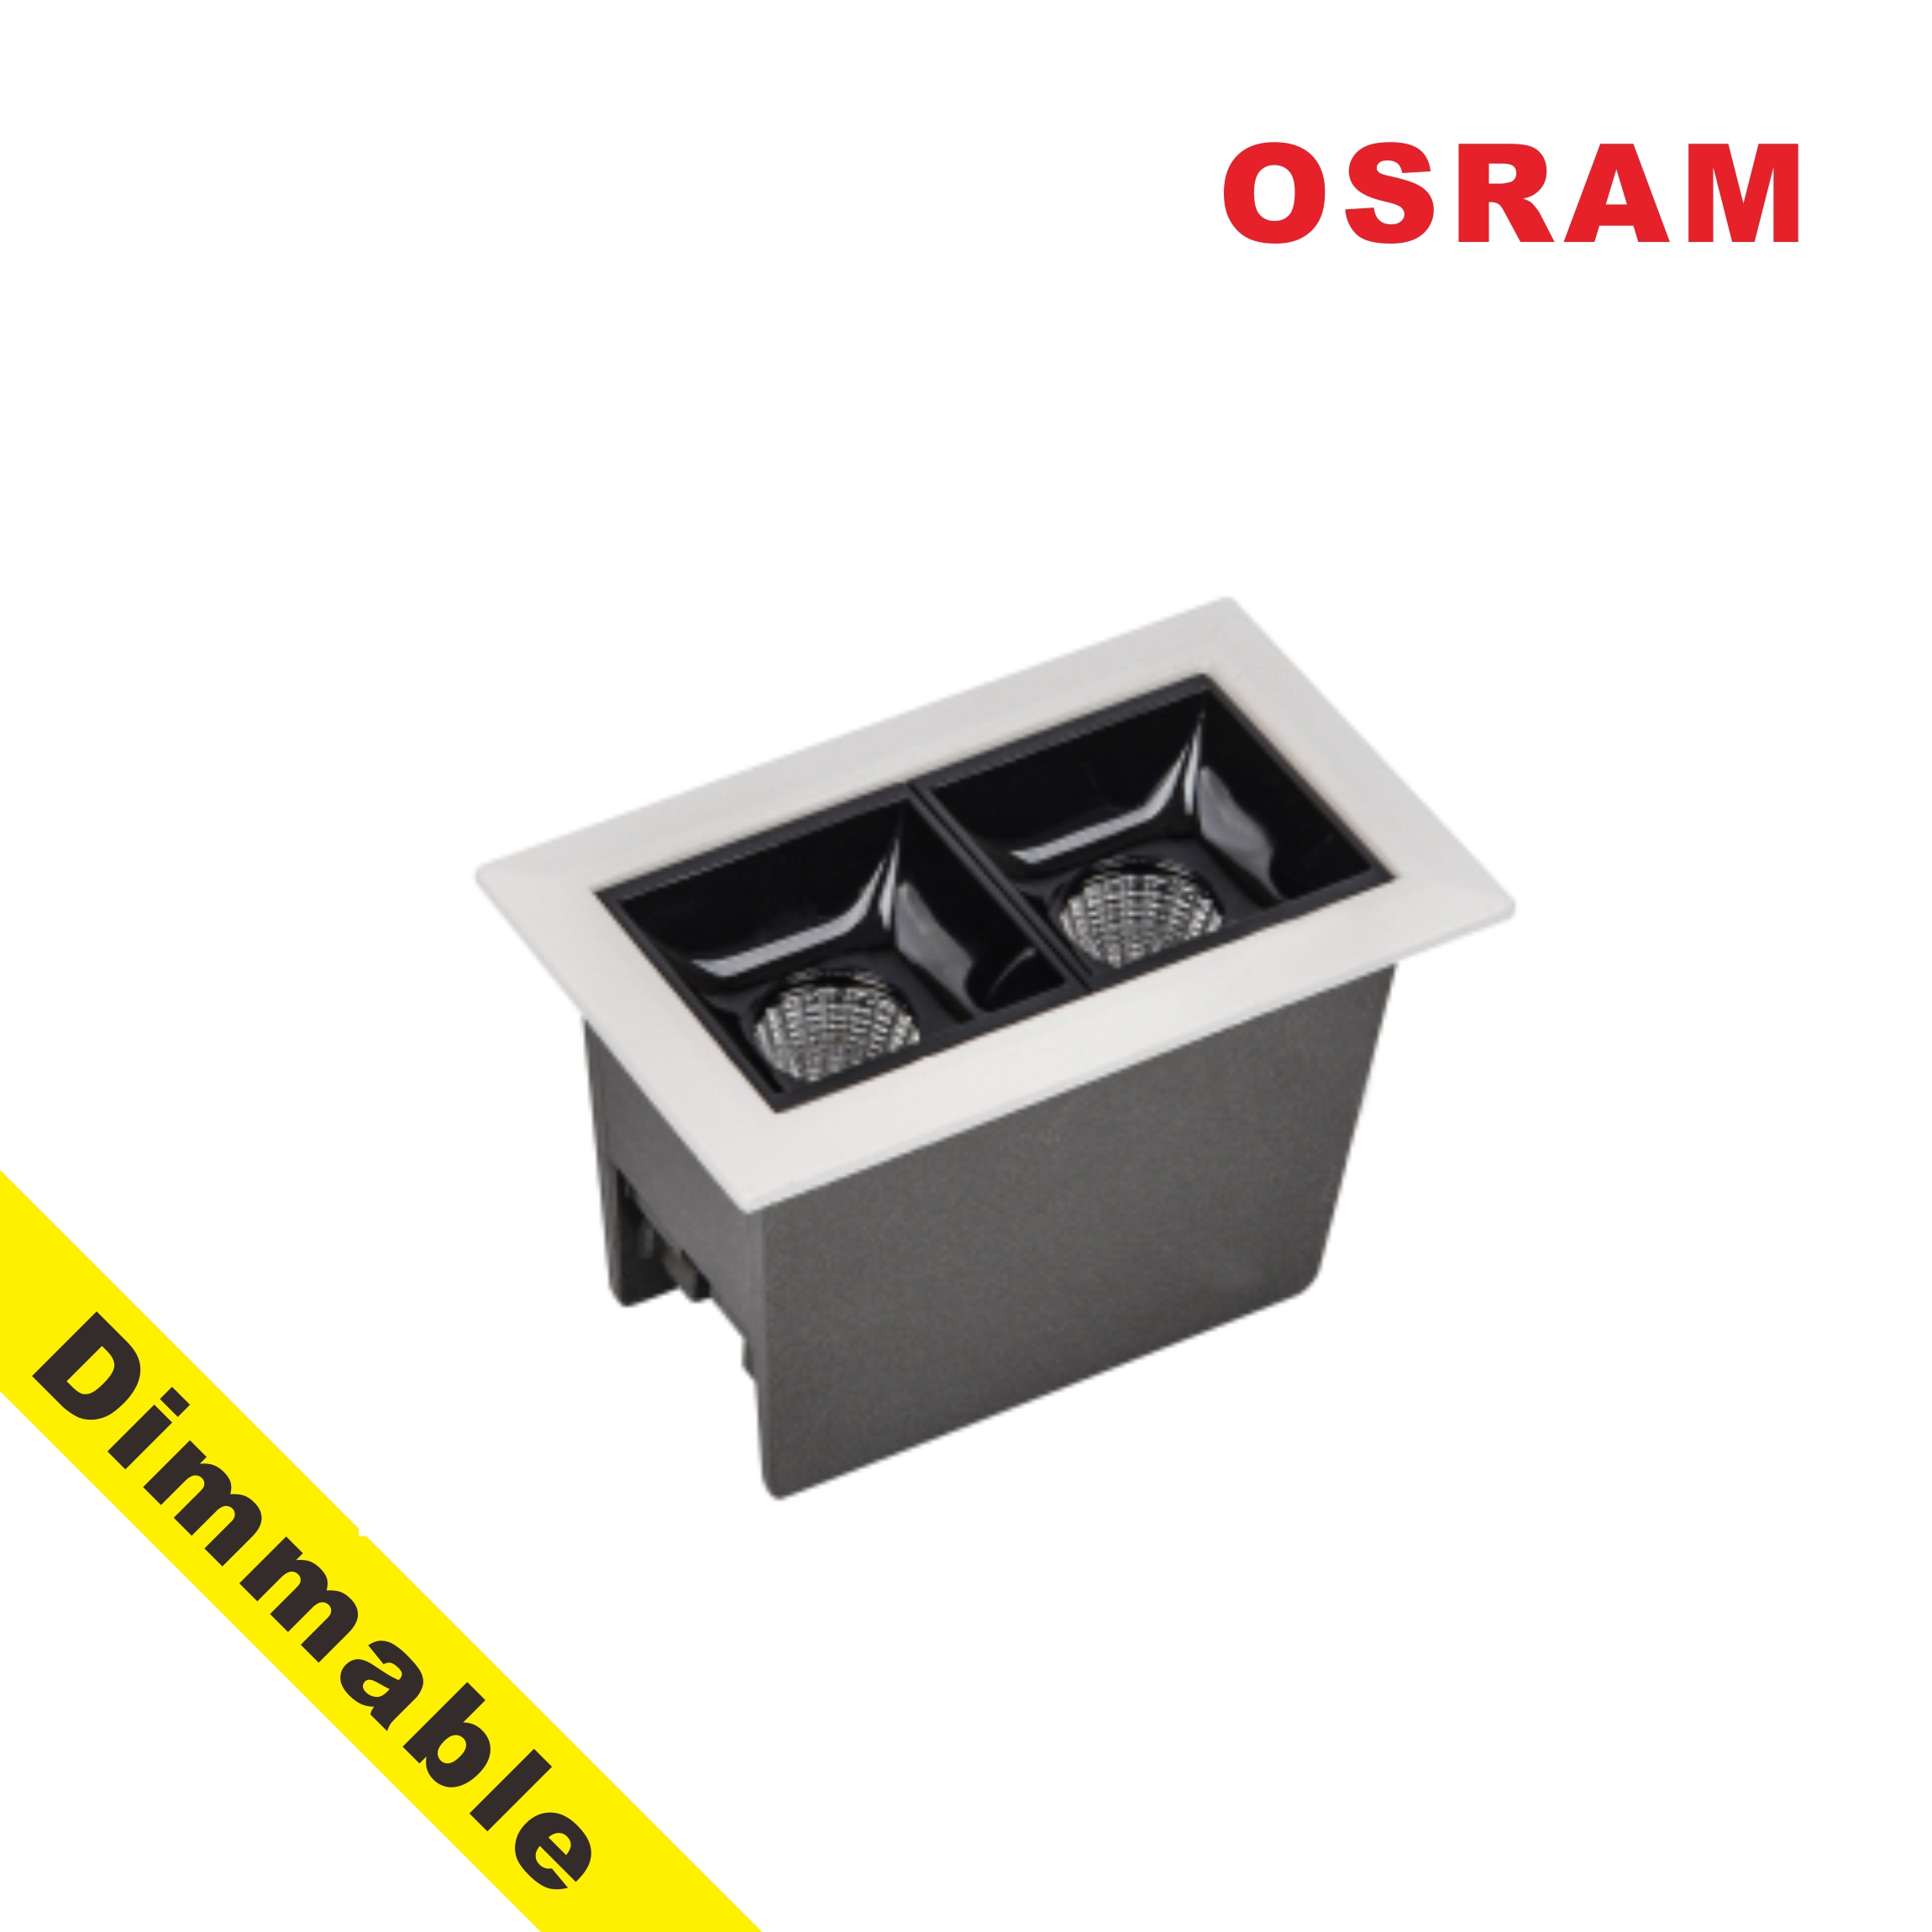 OSRAM  Dimmable Laser Blade 4W LED Linear Downlight